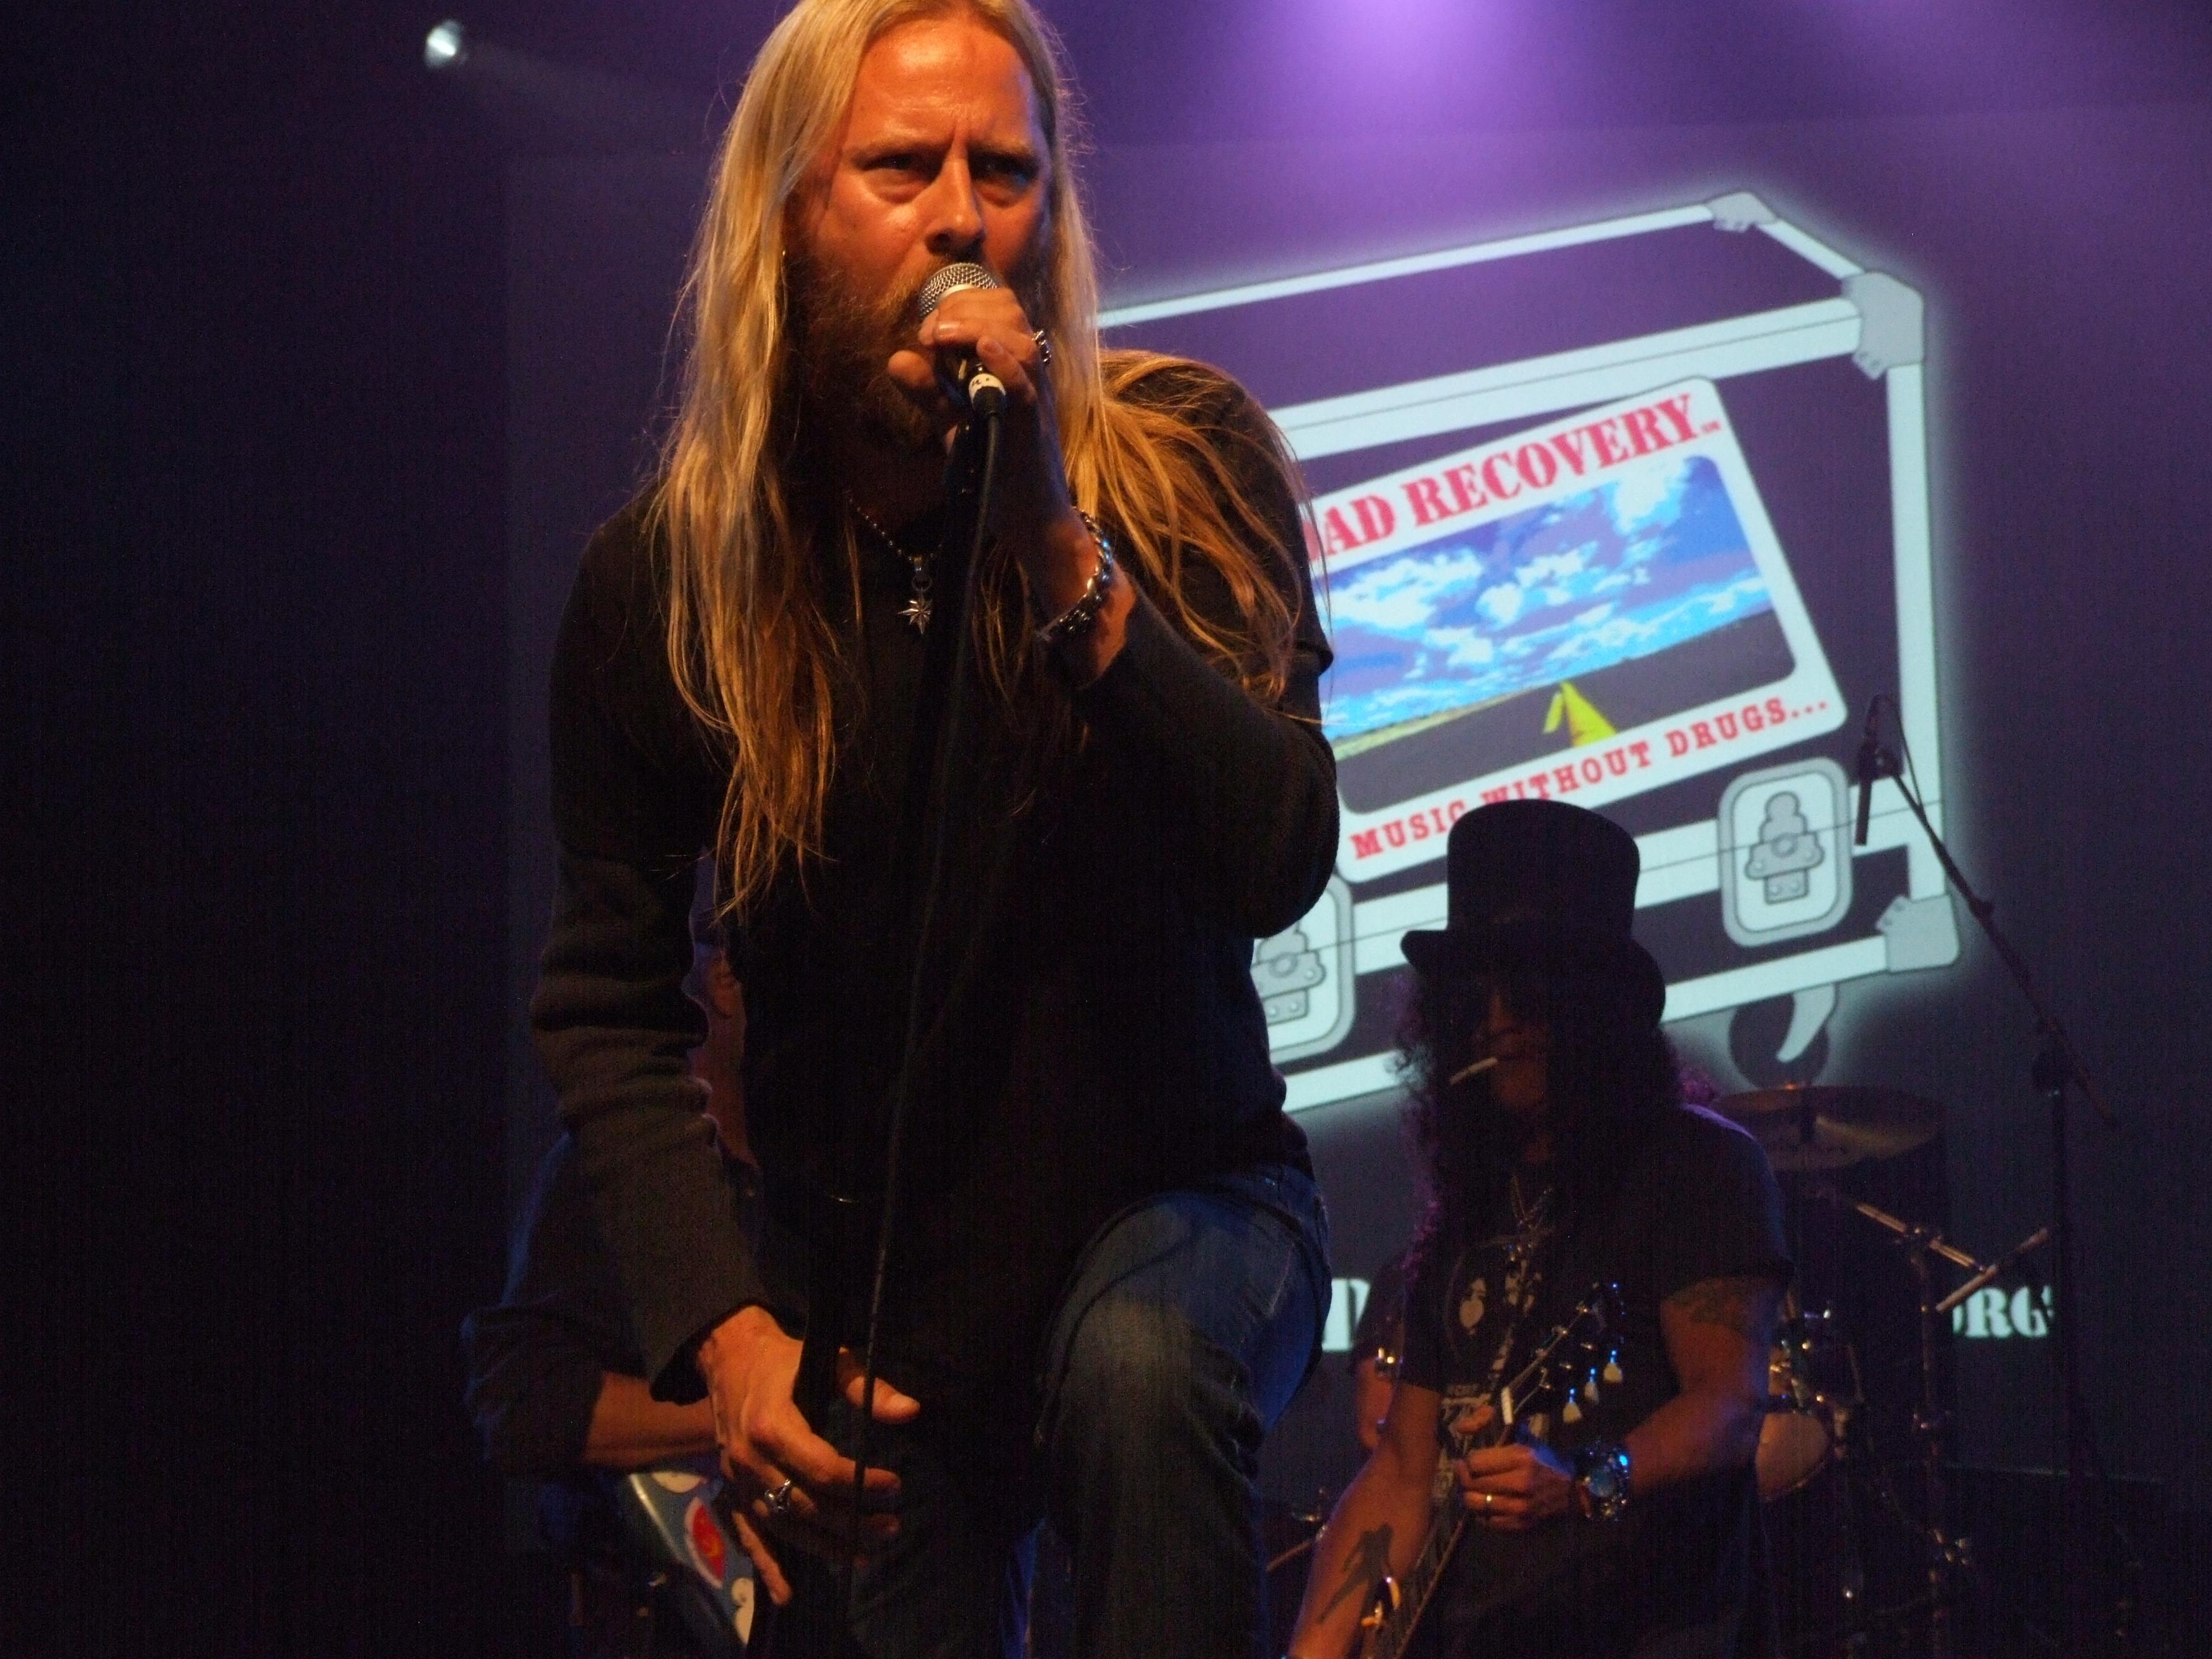 Jerry Cantrell and